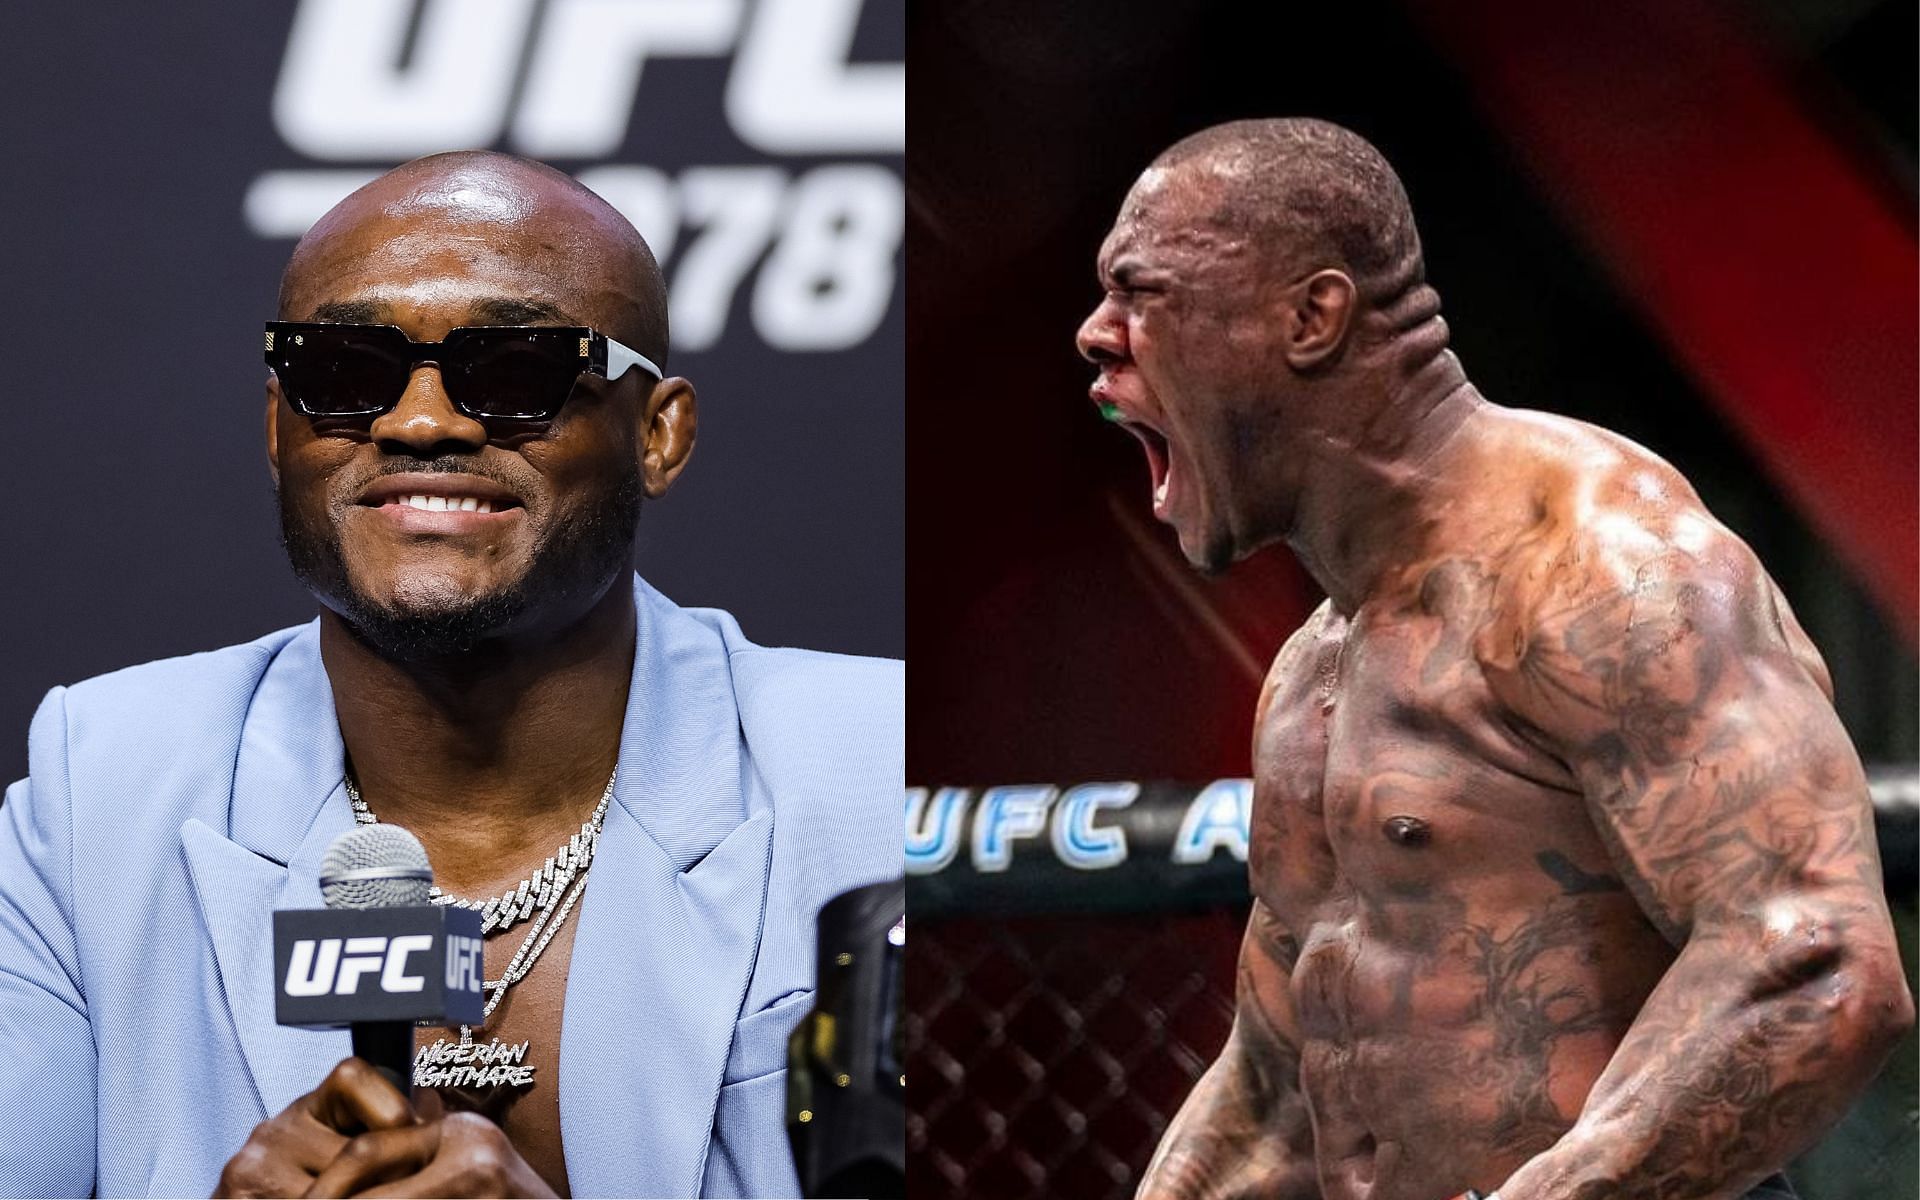 Kamaru Usman (left) and Mohammed Usman (right) [Images courtesy: Getty and Instagram @ufc]